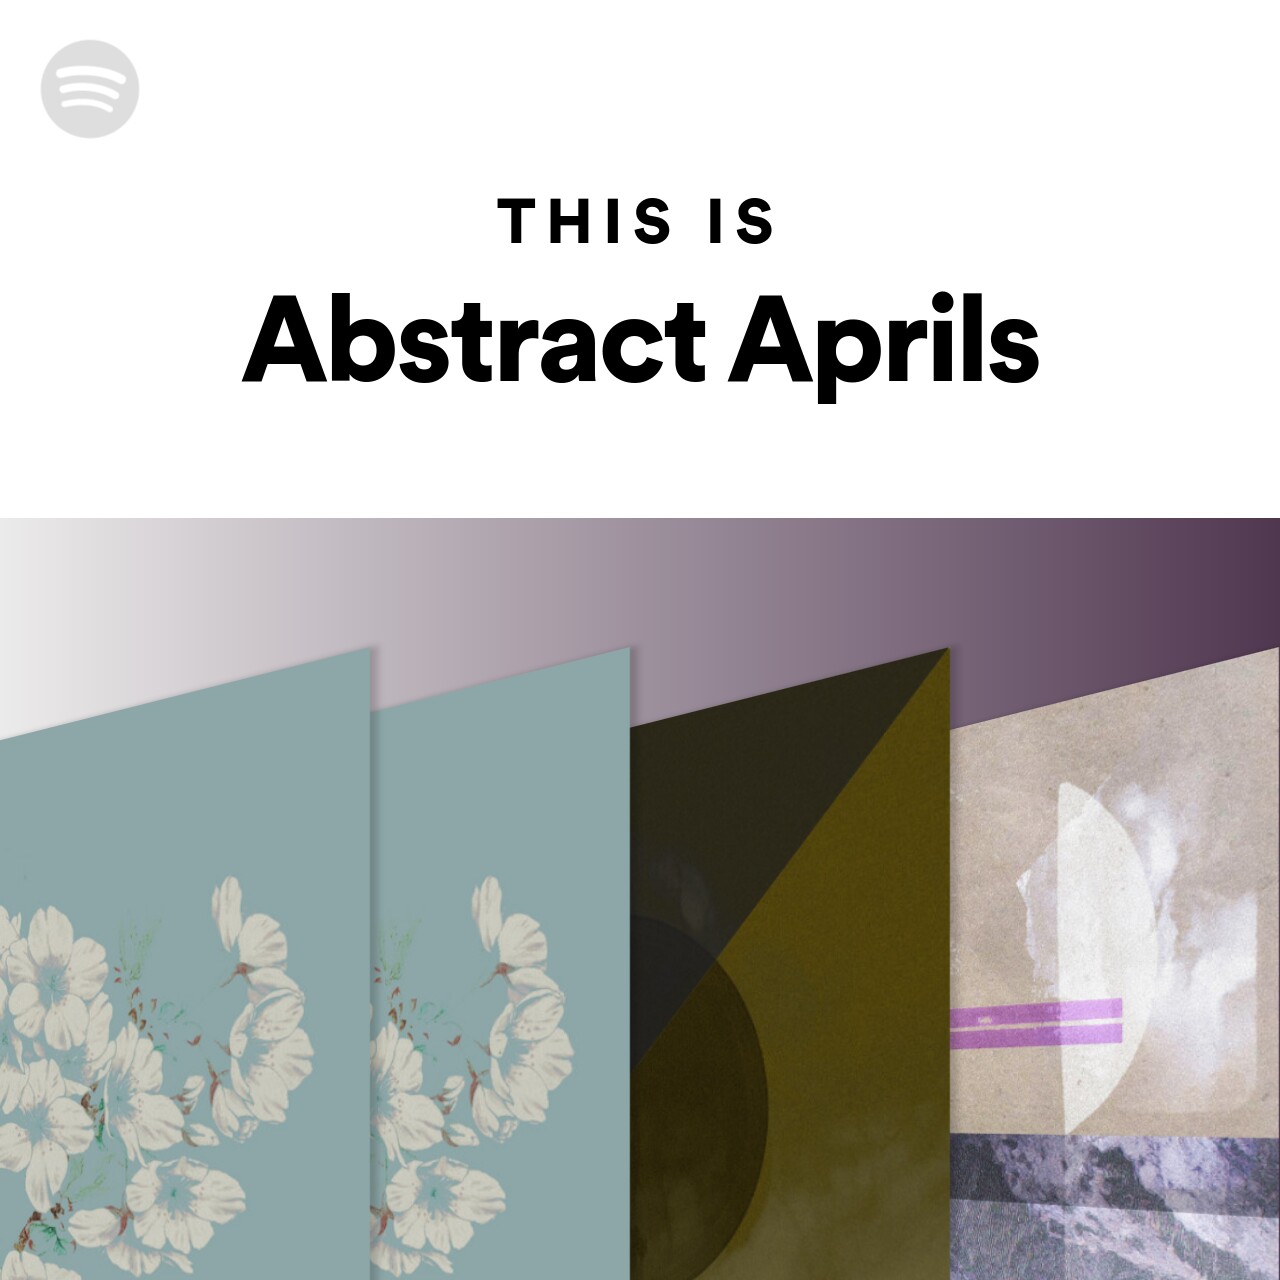 This Is Abstract Aprils